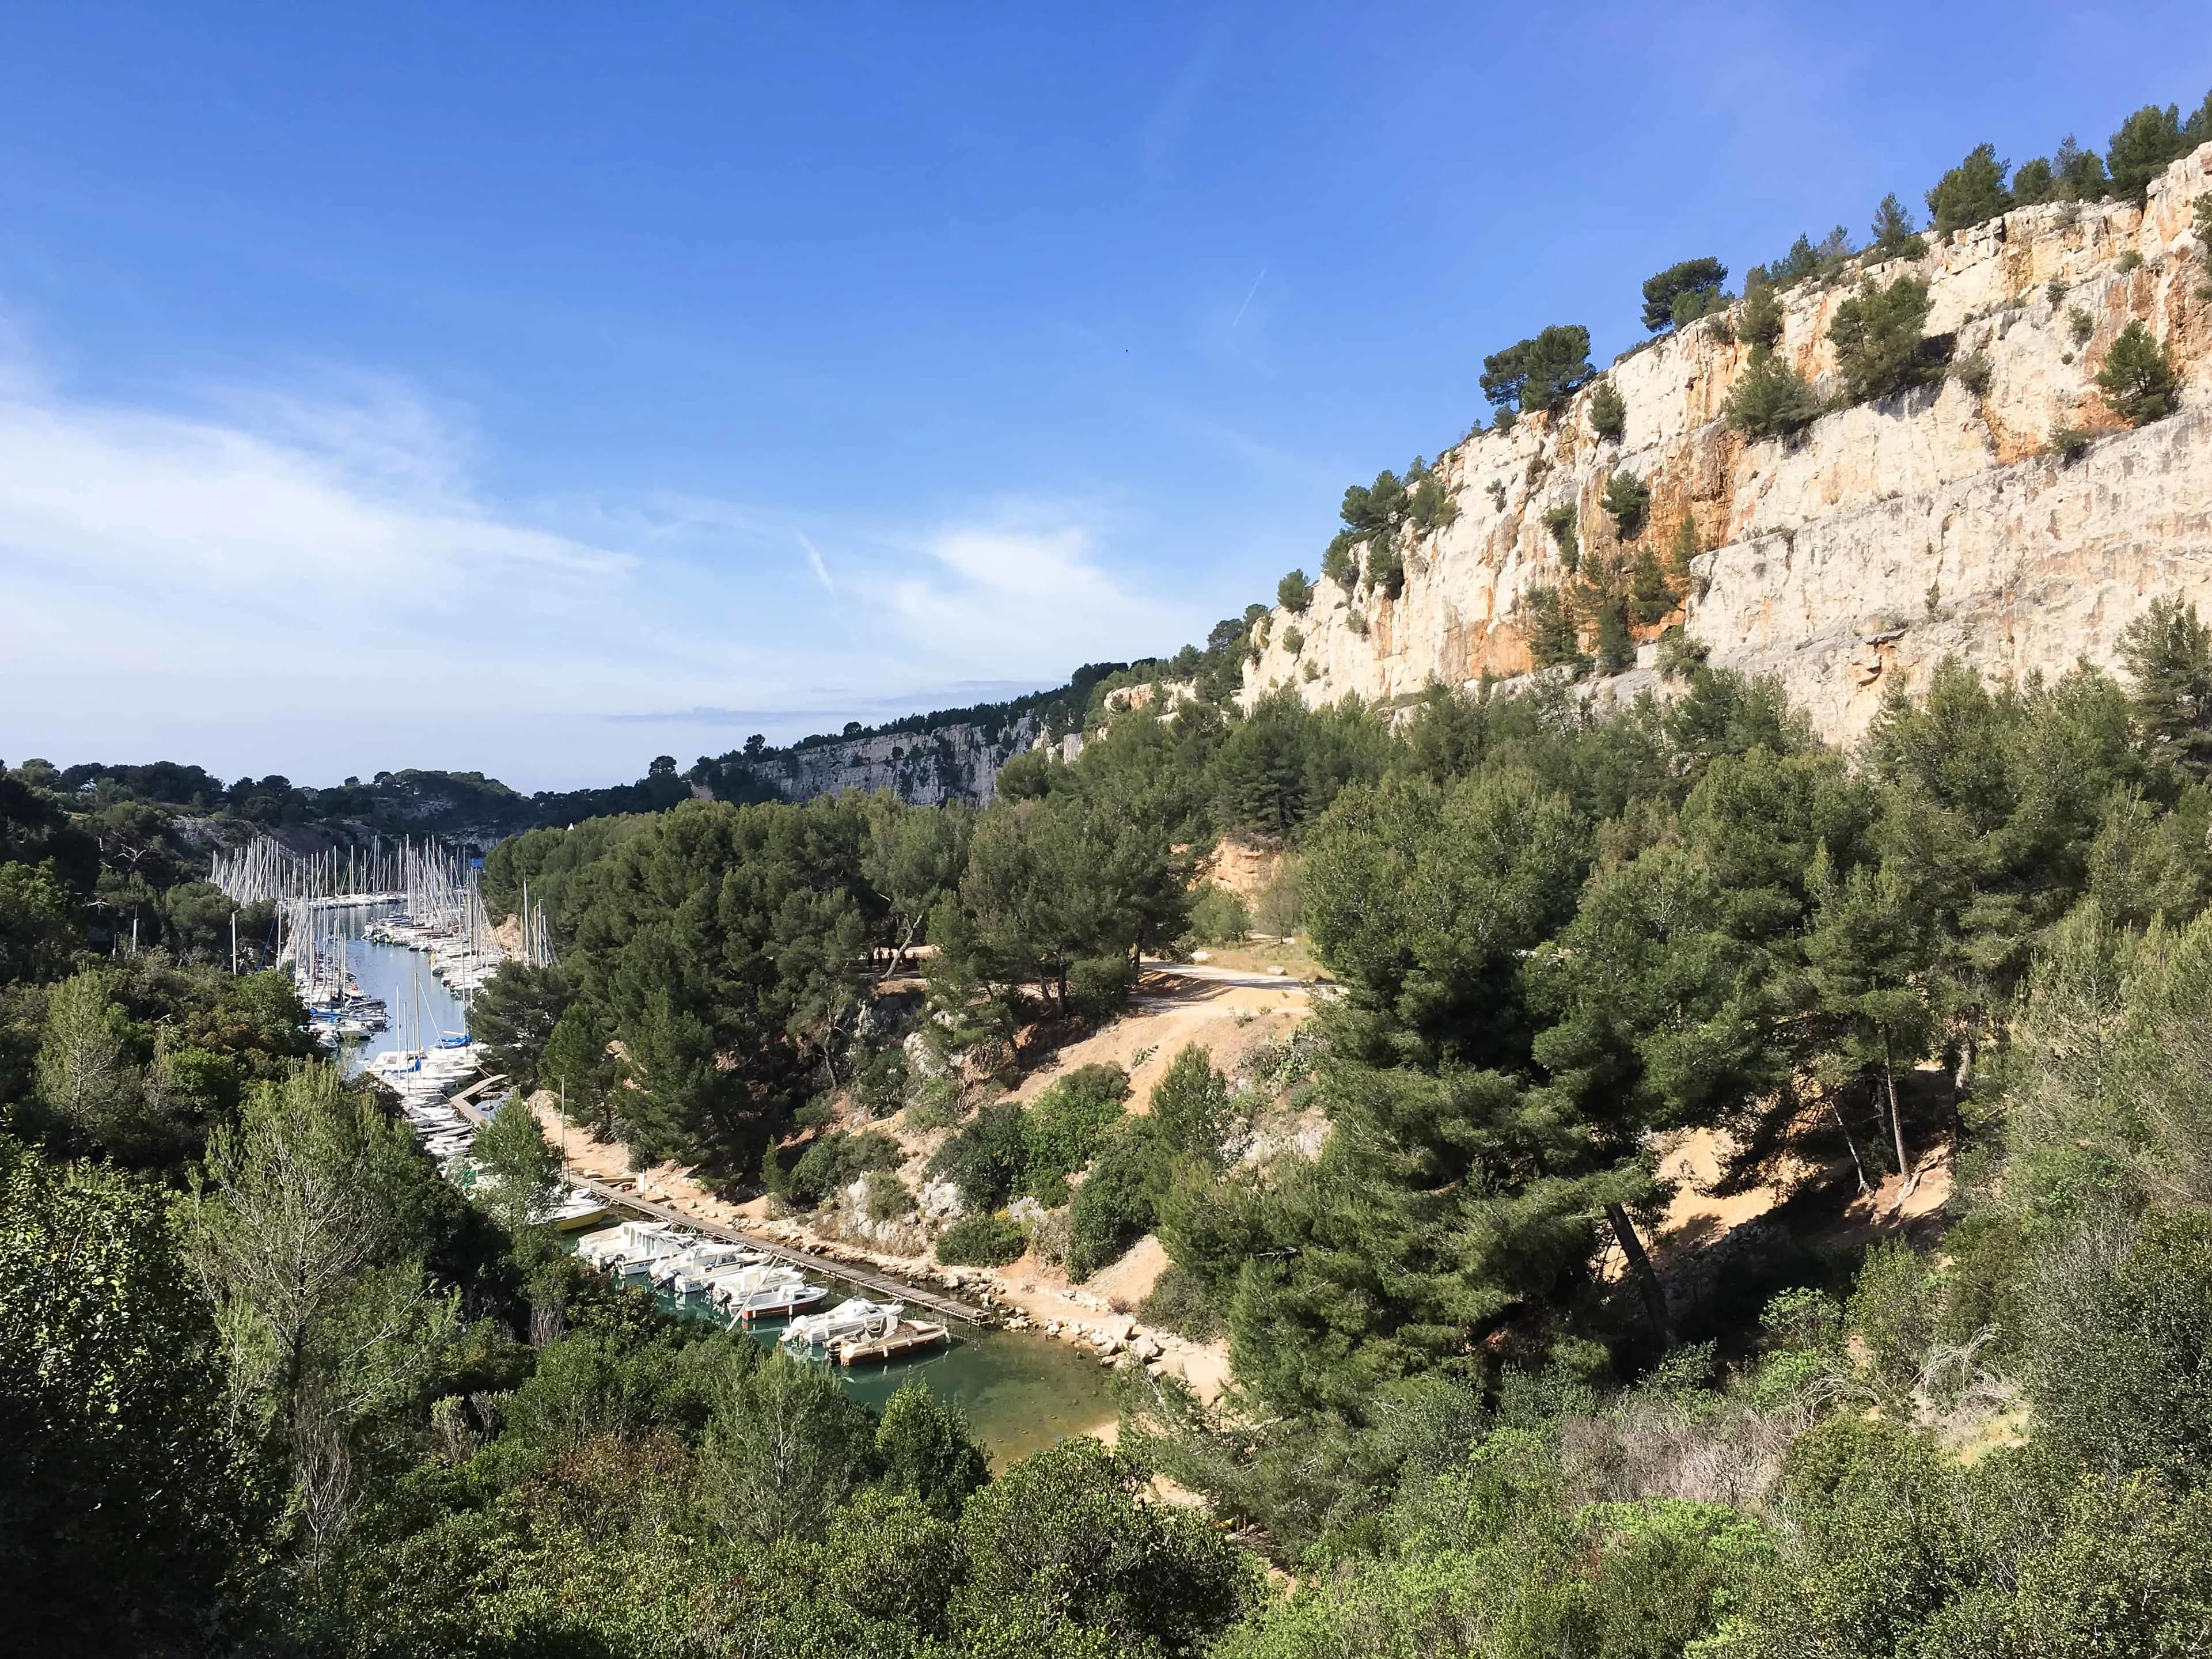 Port Mio hiking Les Calanques near Cassis, France